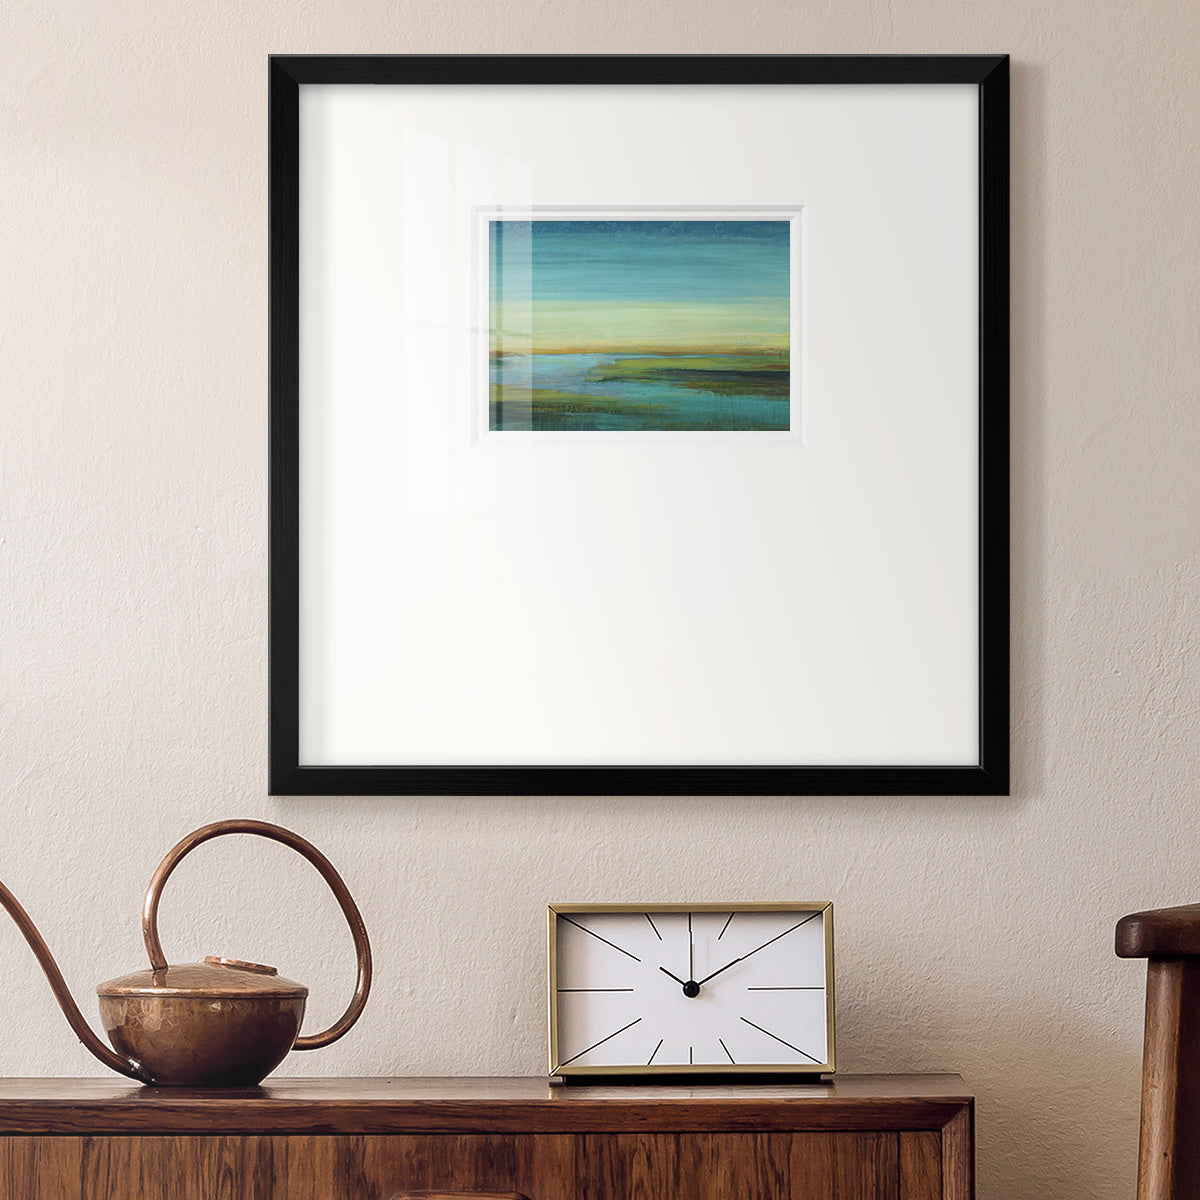 The Flow- Premium Framed Print Double Matboard